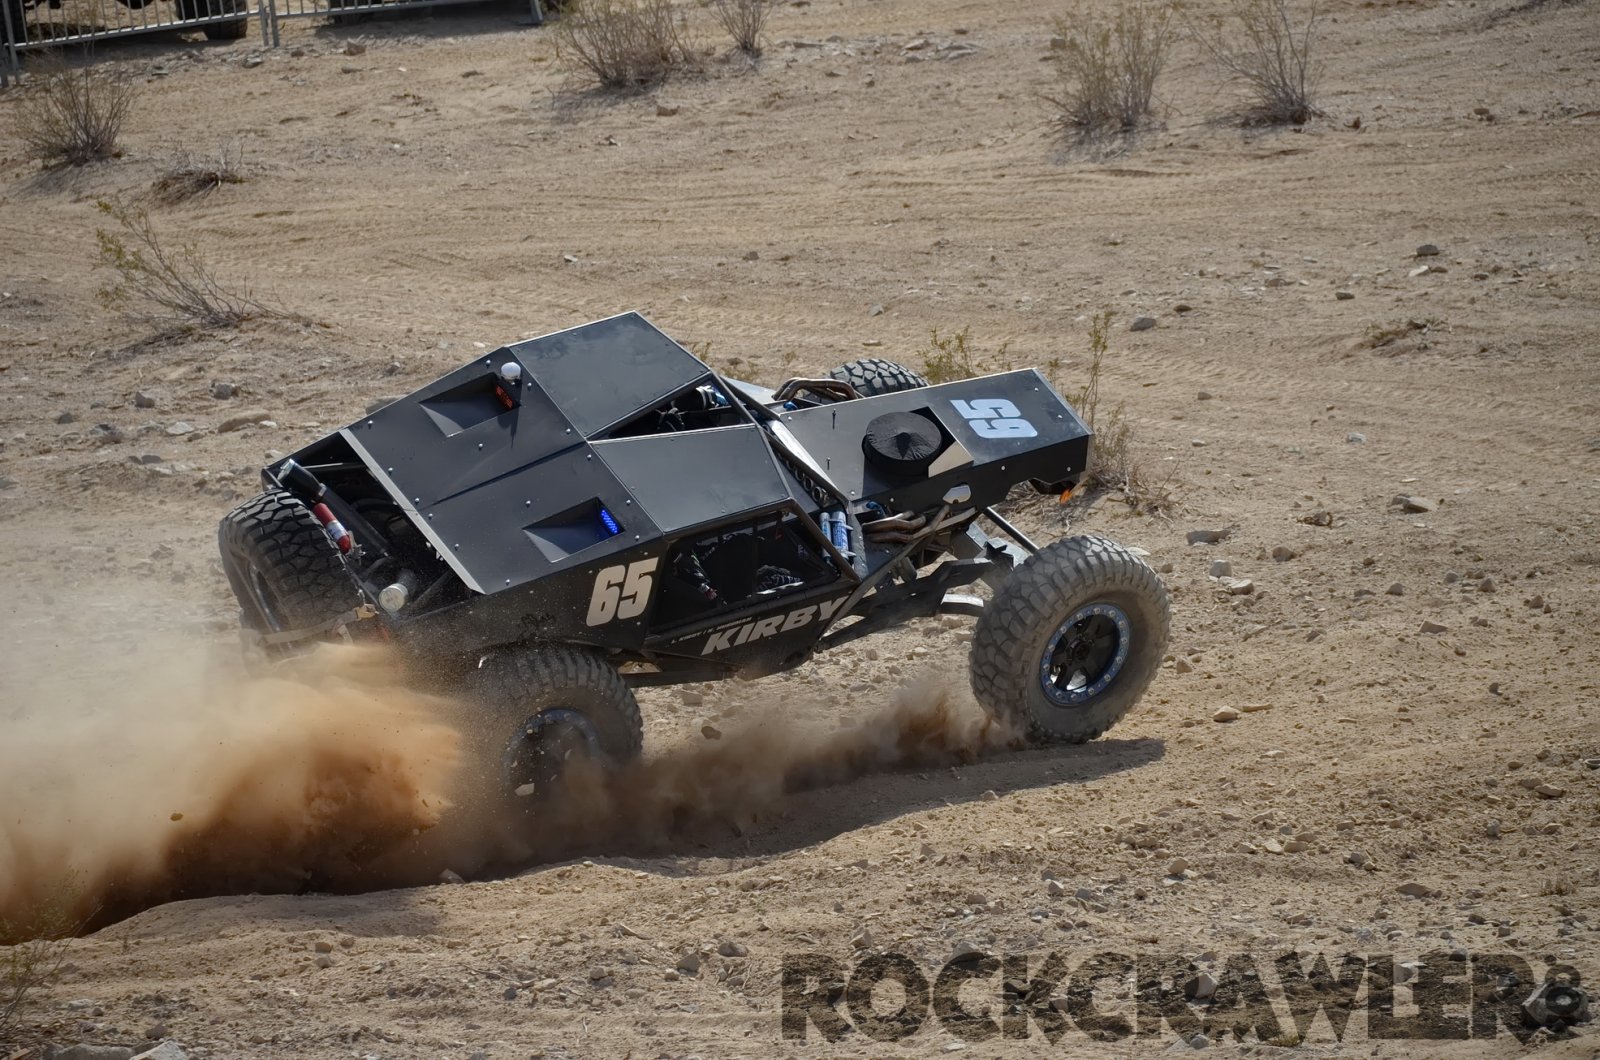 2014_King-of-the-Hammers_65Kirby_DSC_8839